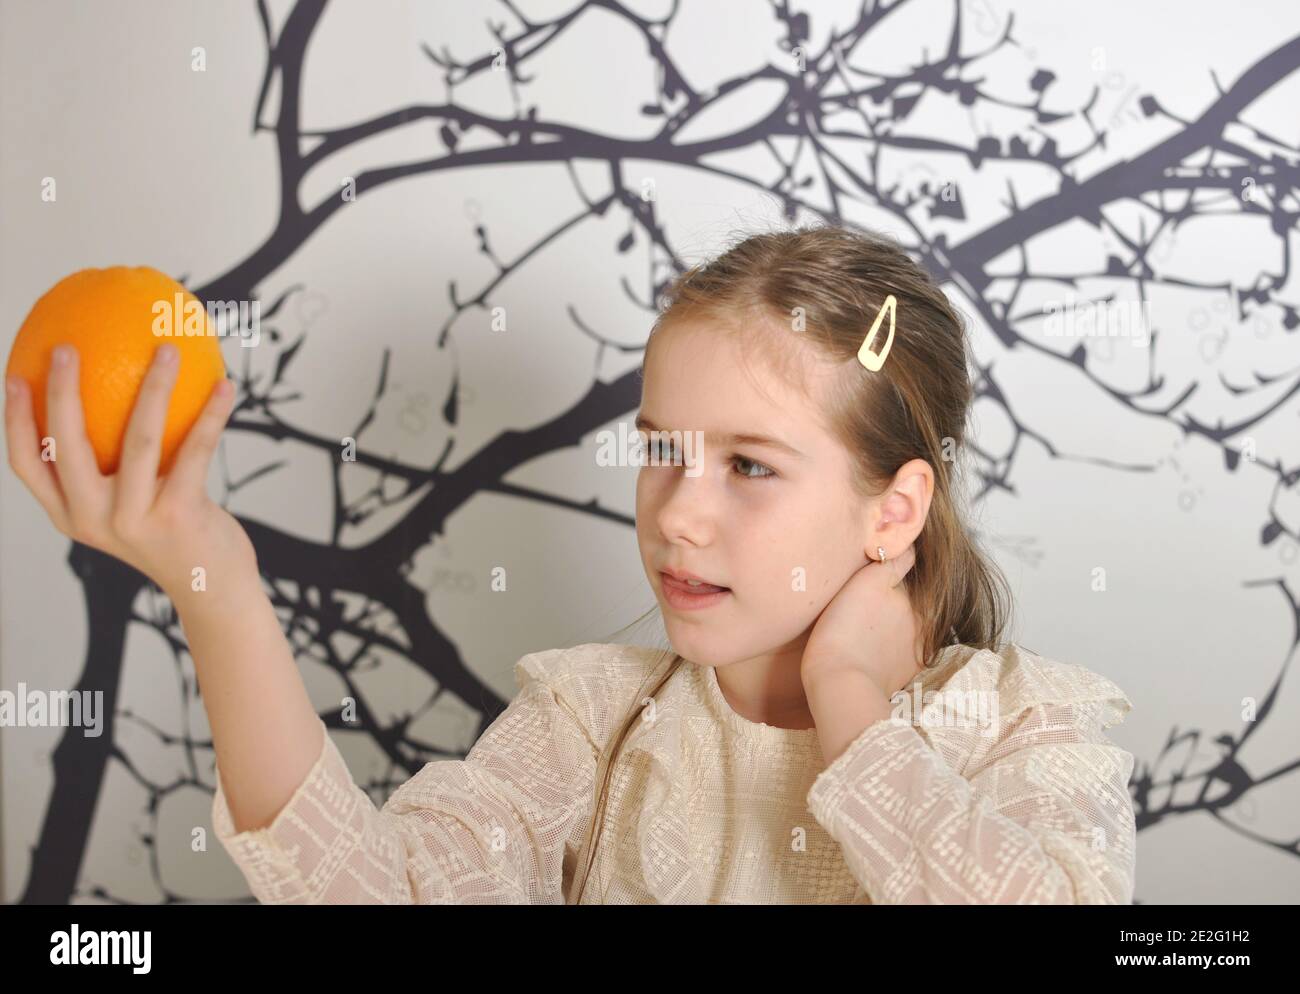 White girl (child, kid) smiling and looking at an orange hold in her hand. Stock Photo